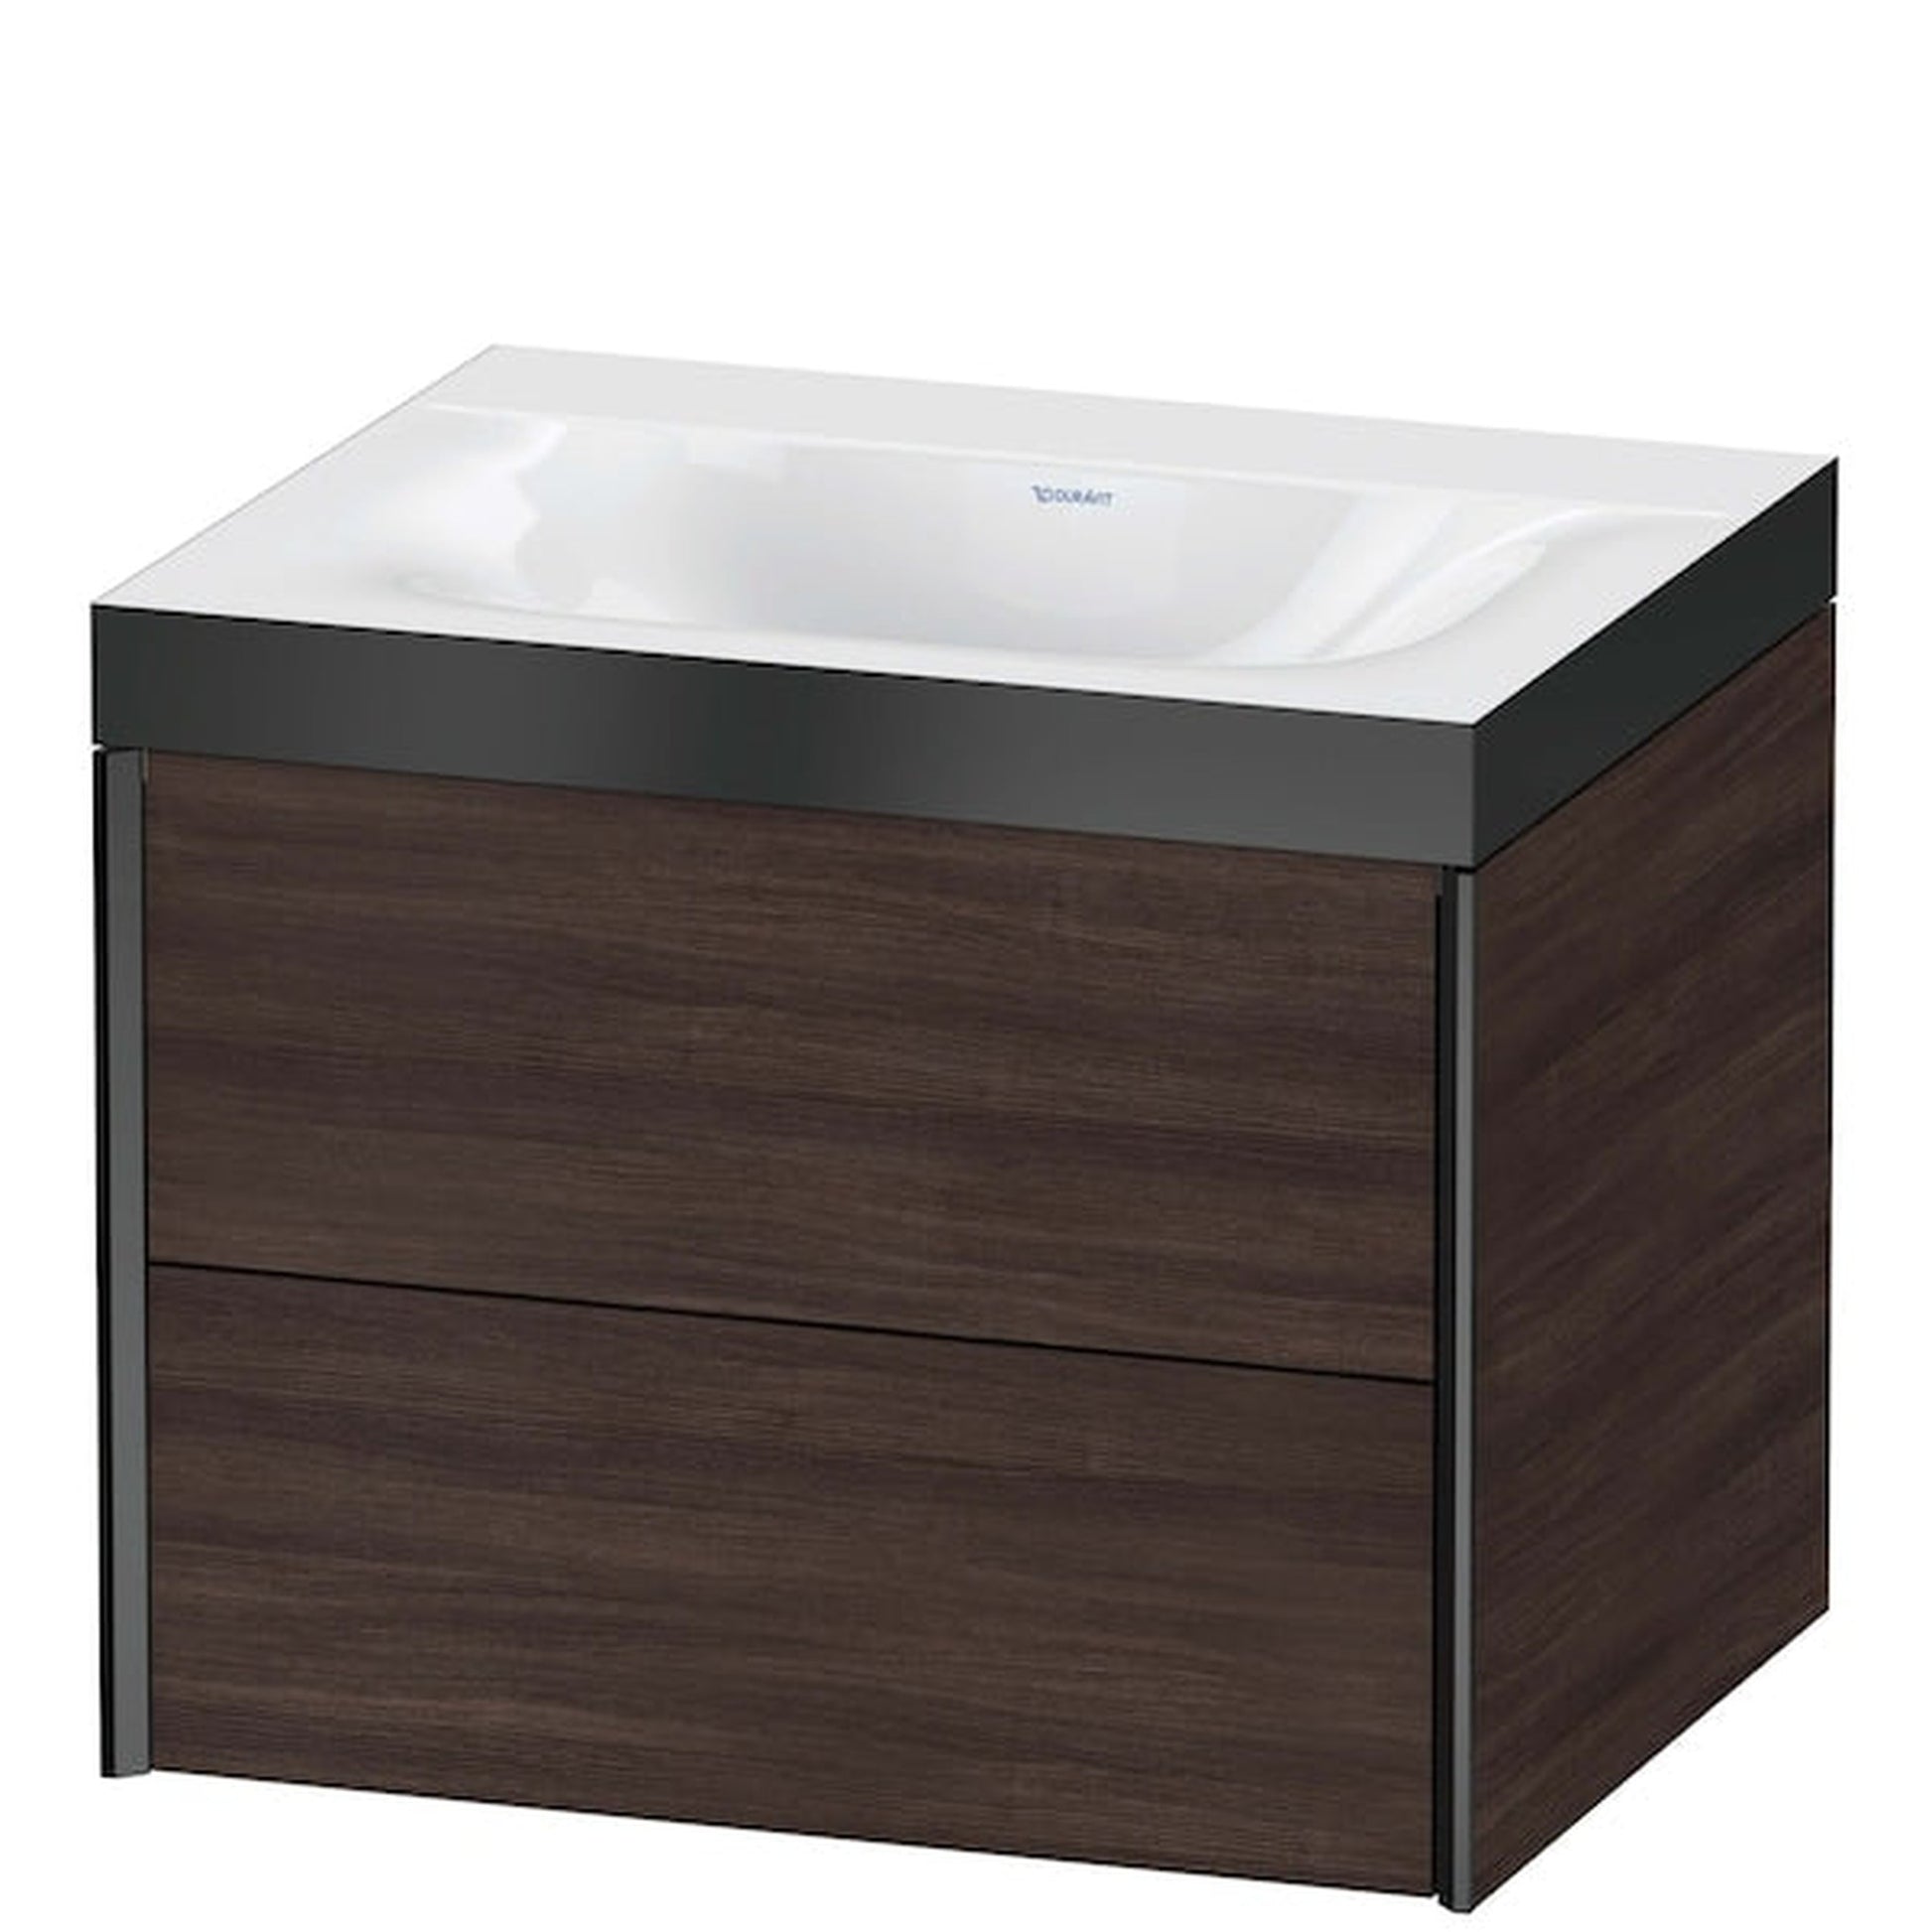 Duravit Xviu 24" x 20" x 19" Two Drawer C-Bonded Wall-Mount Vanity Kit Without Tap Hole, Chestnut Dark (XV4614NB253P)